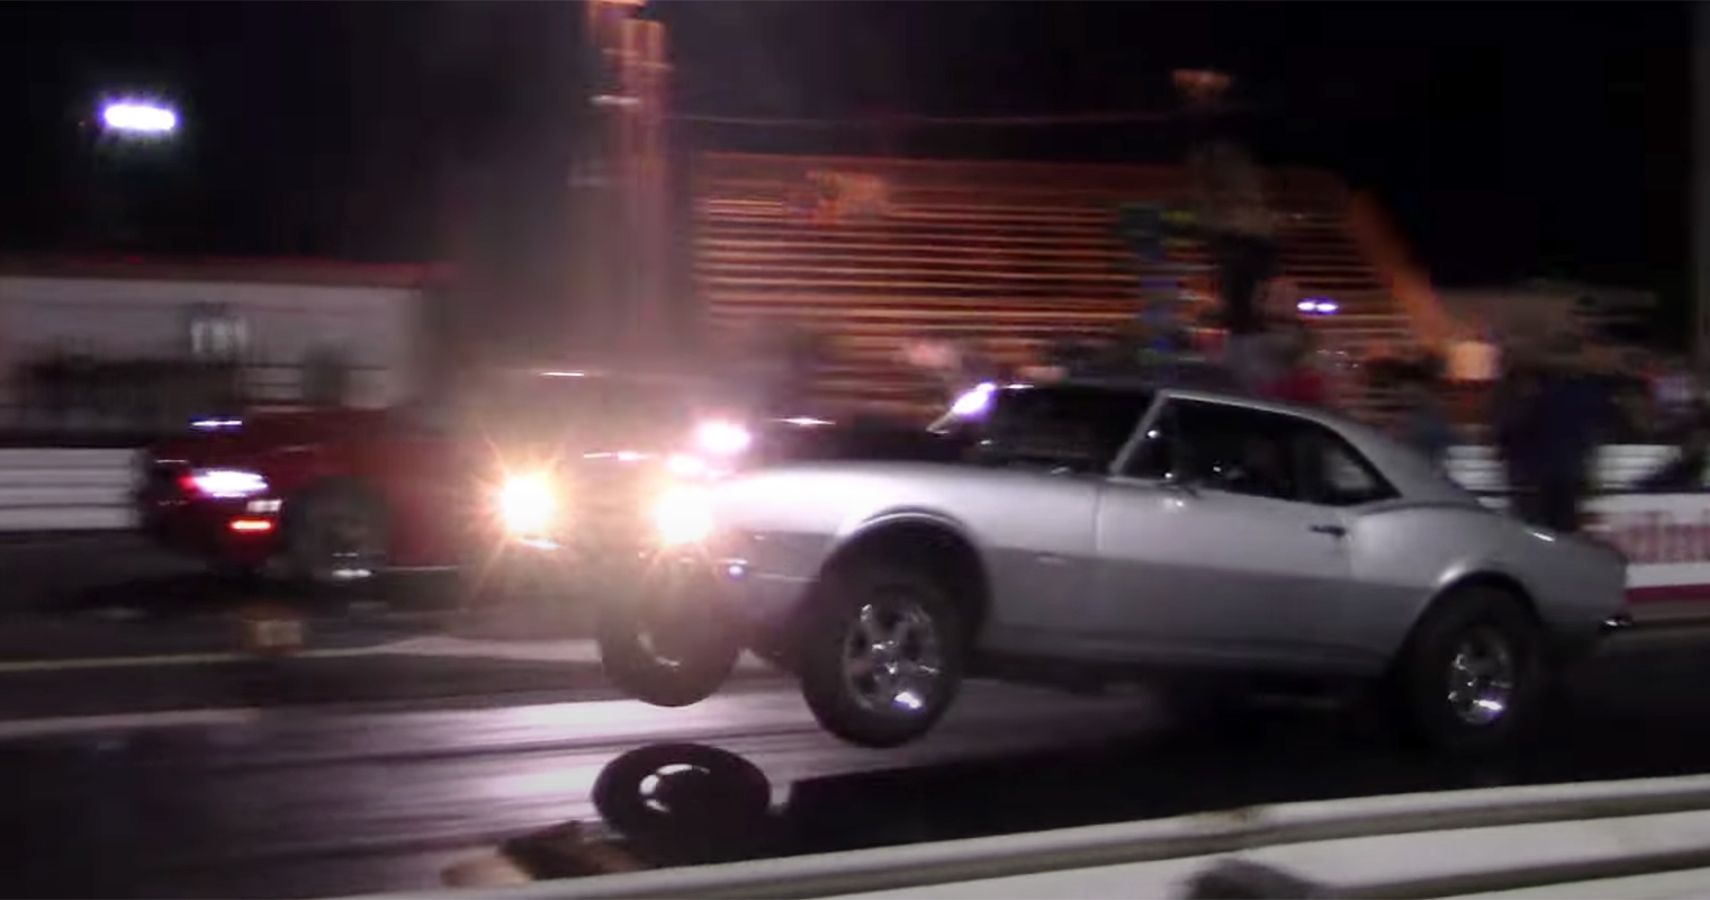 Silver 1967 SBC Chevrolet Camaro in drag race, night, view from distance at side